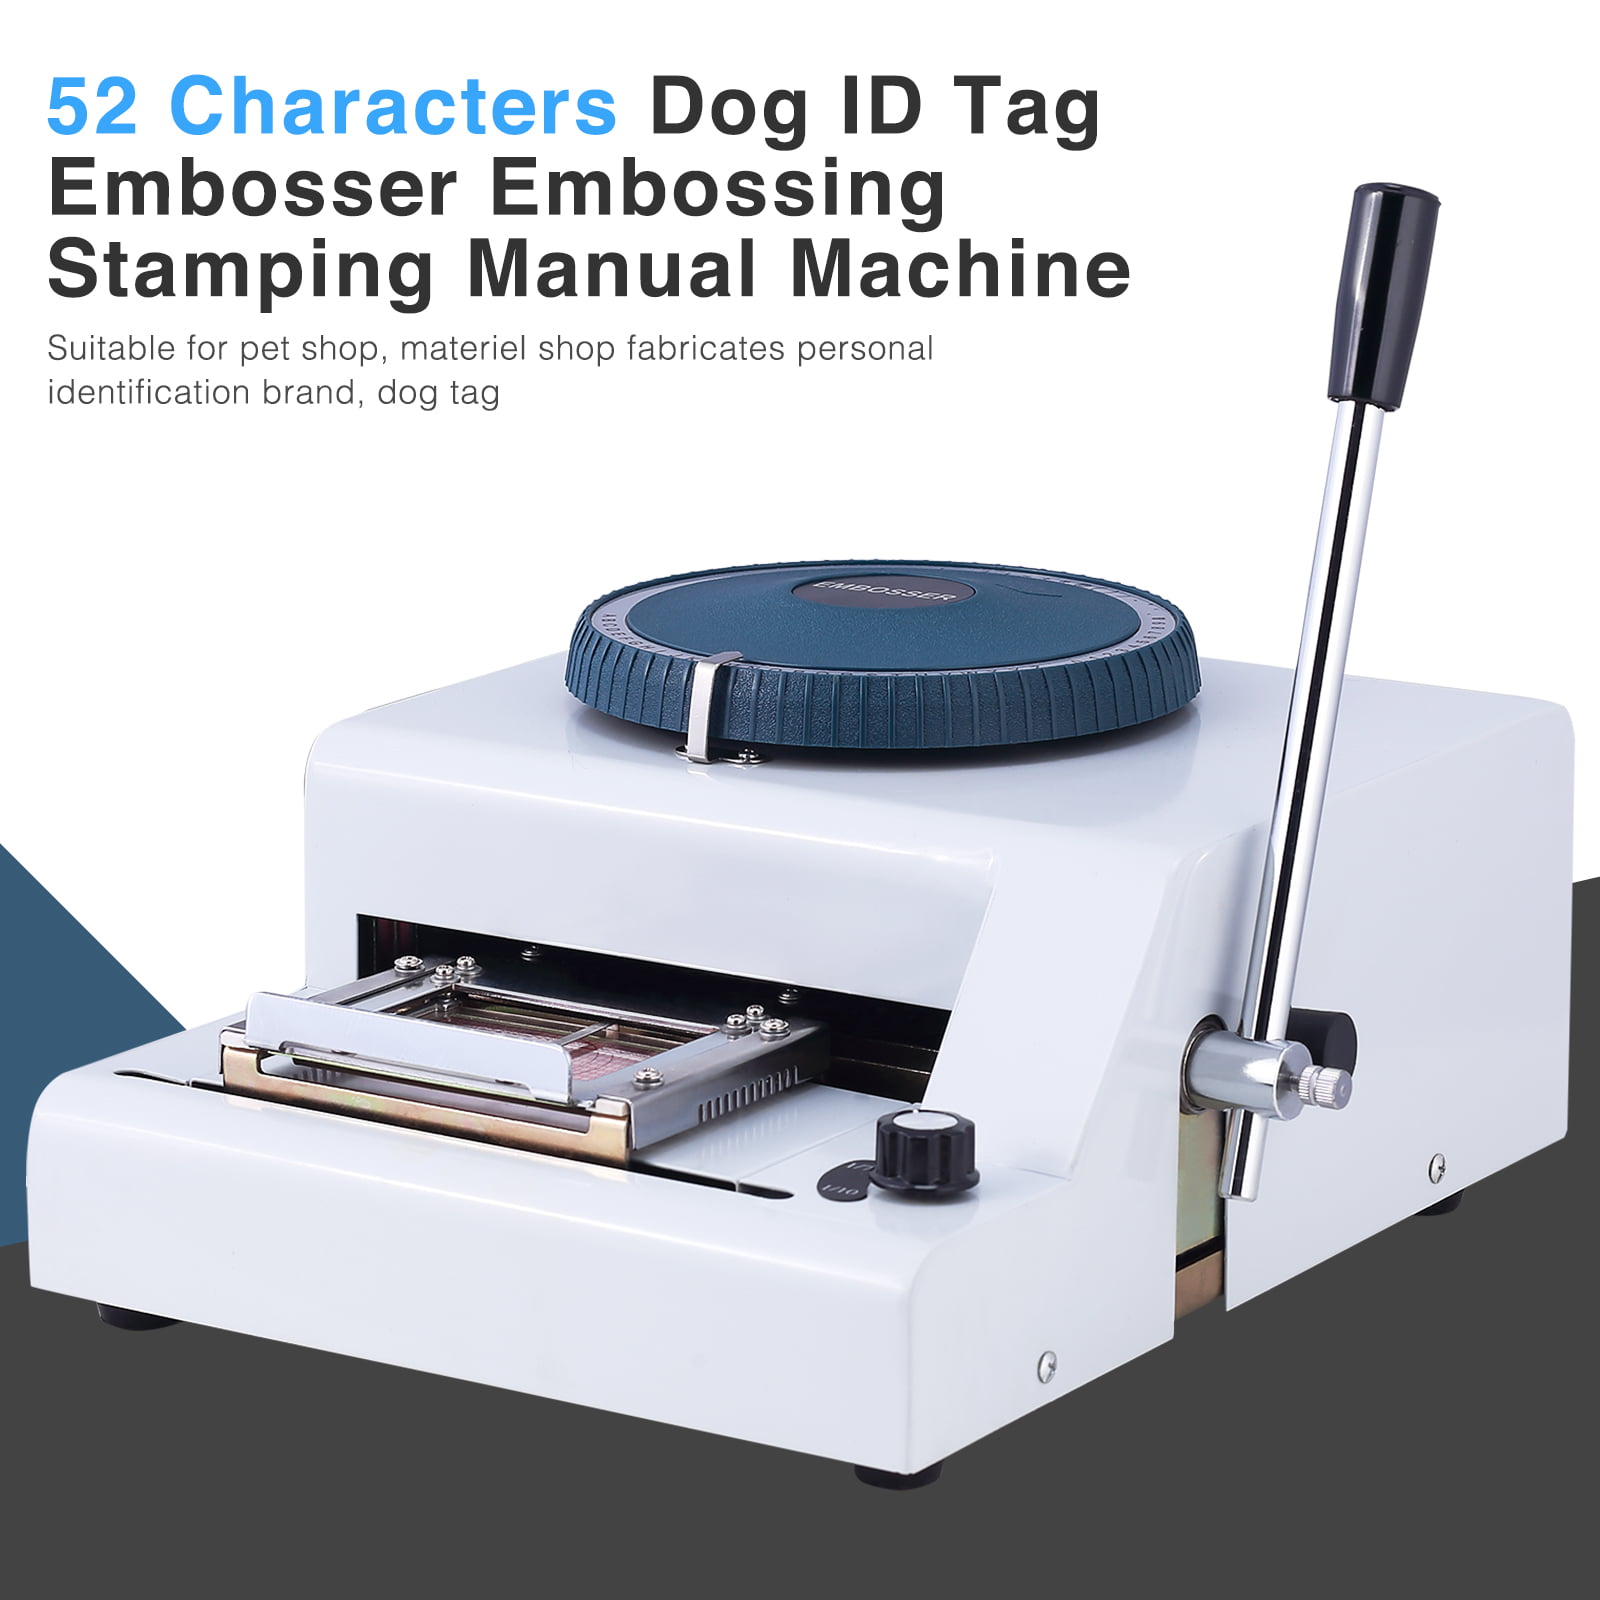 Dog Tag Embossers & Stamping Machines - IdentiSys